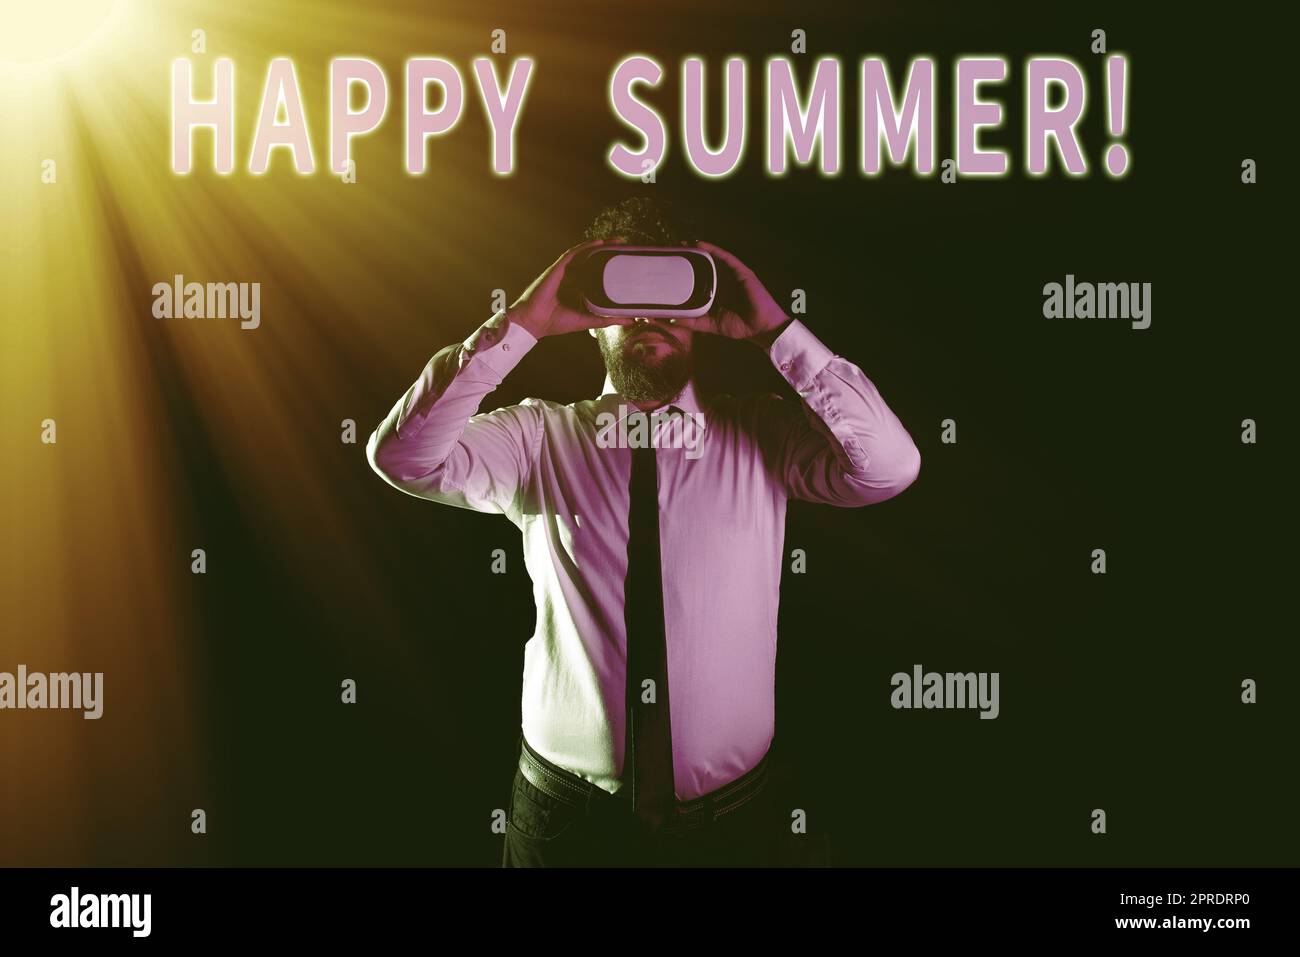 Inspiration showing sign Happy Summer. Business idea Beaches Sunshine Relaxation Warm Sunny Season Solstice Businessman Taking Professional Training Through Virtual Reality Goggles. Stock Photo